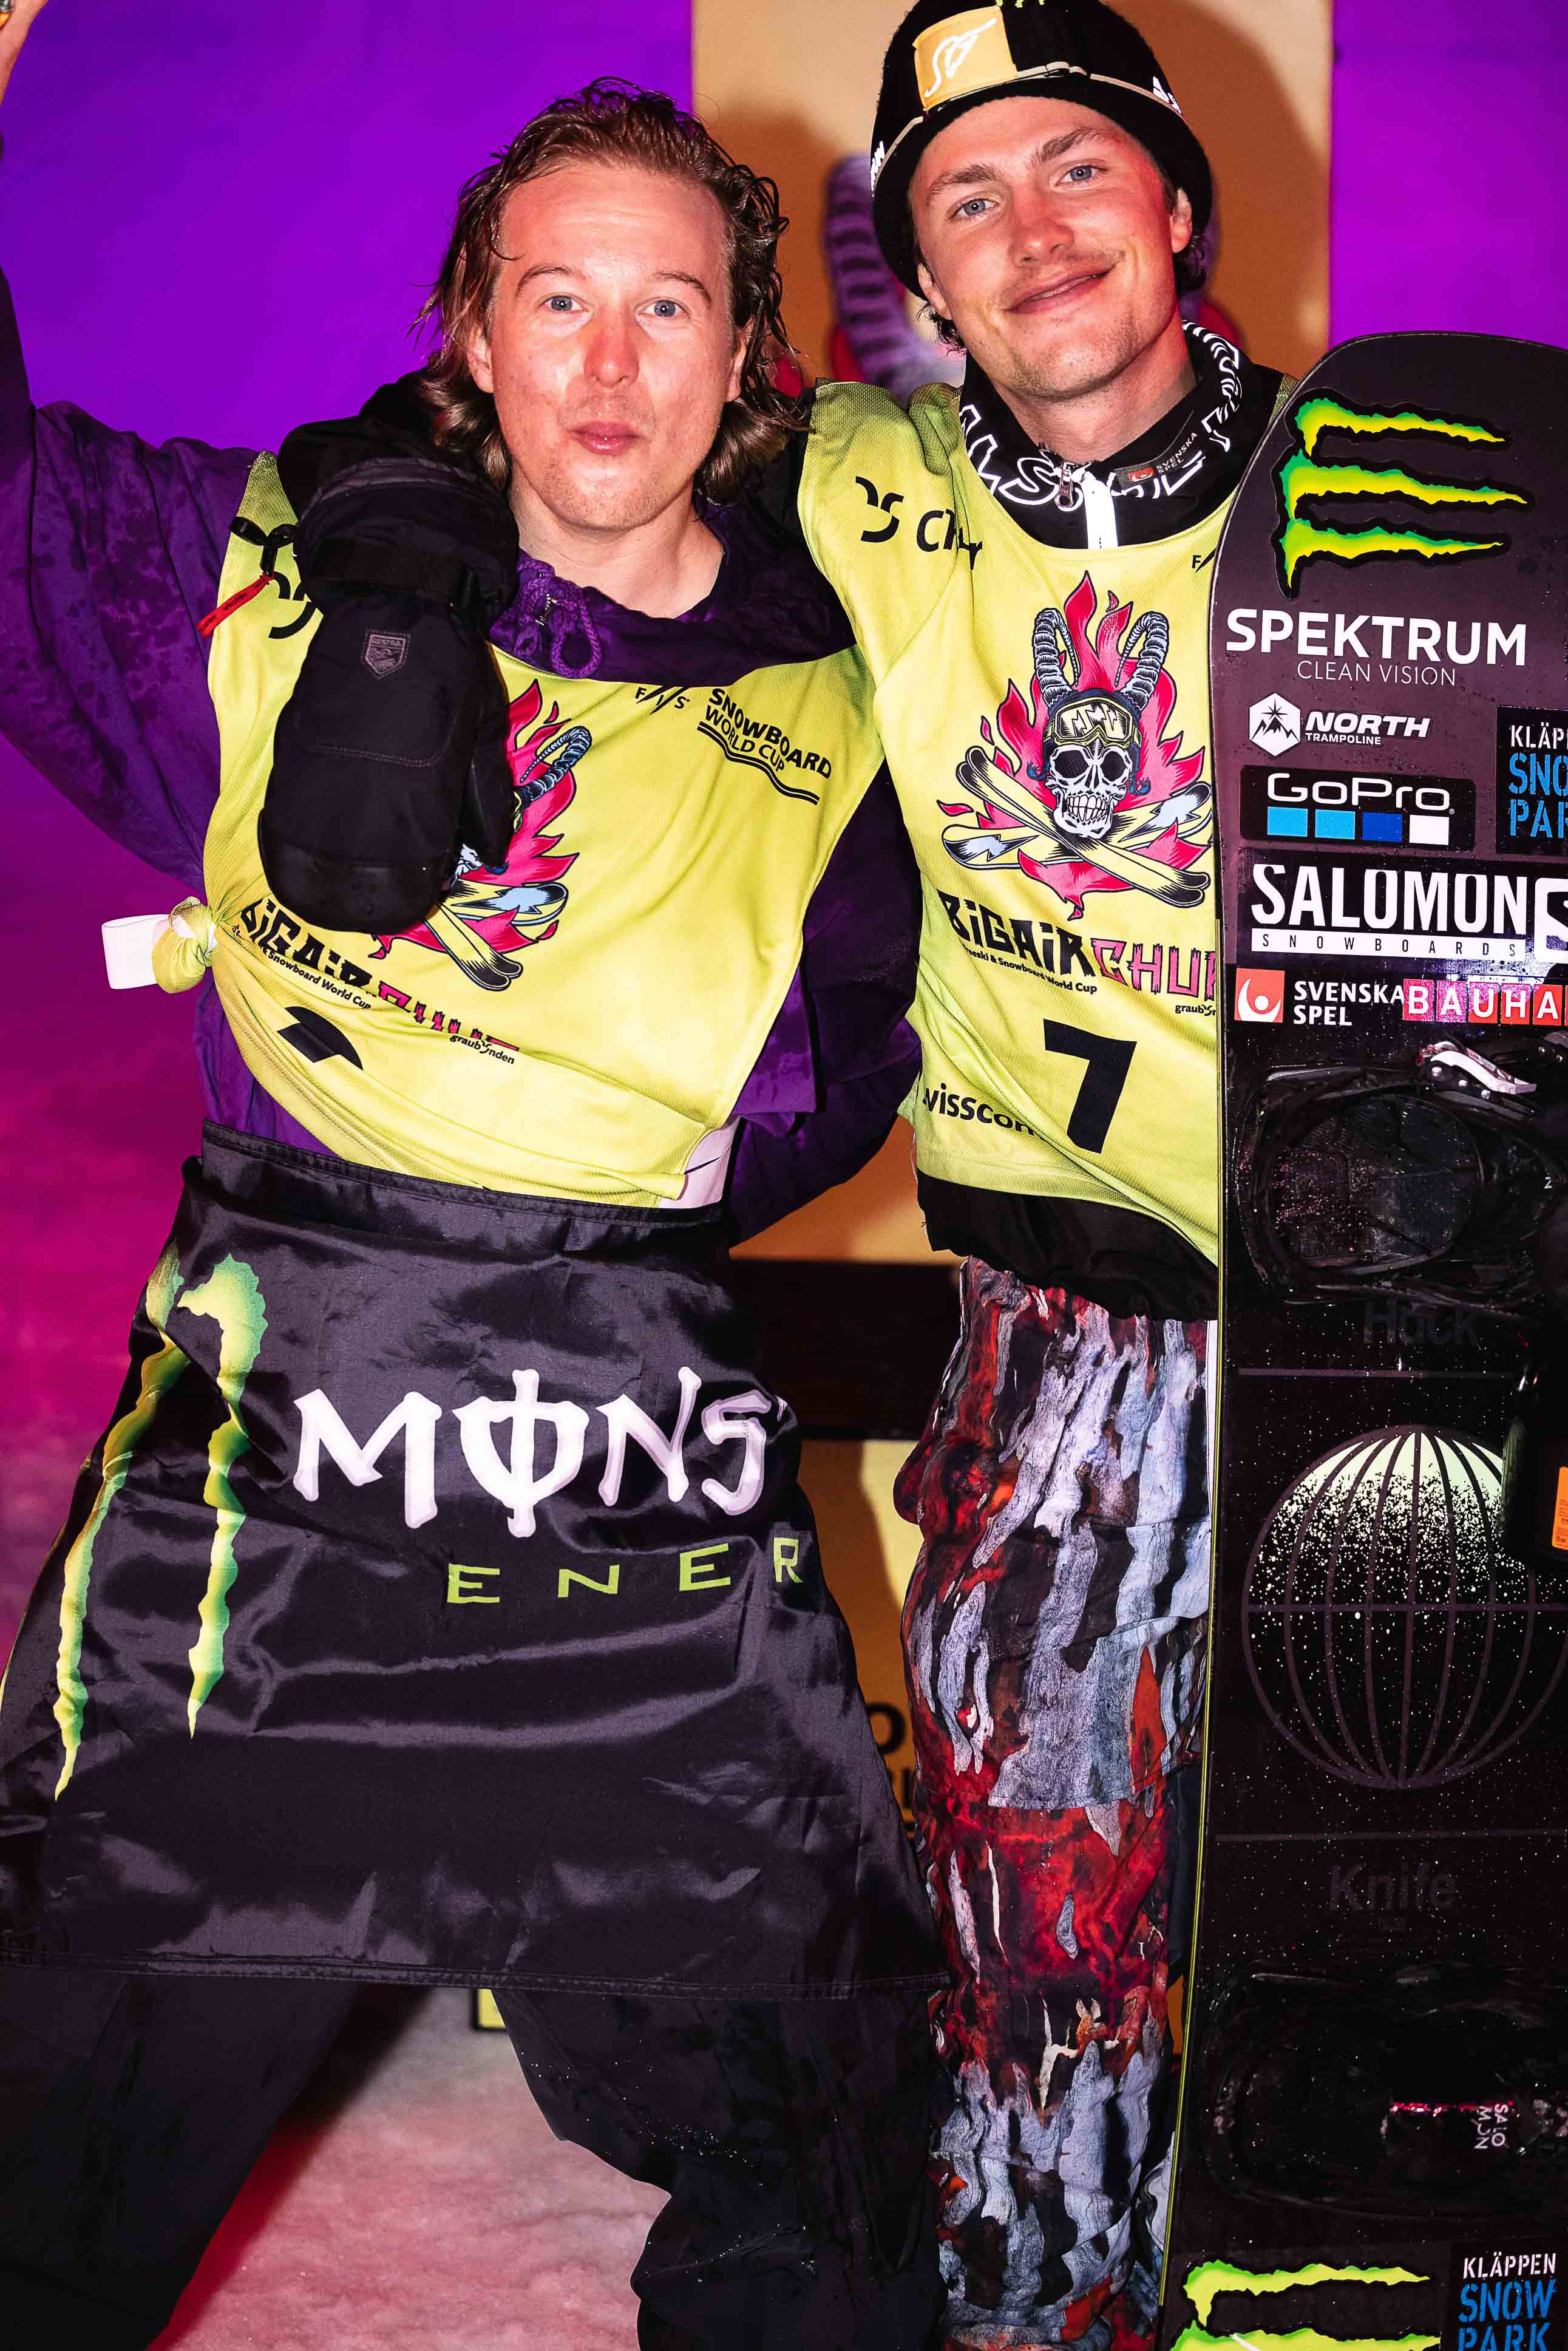 Monster Energy's Rene Rinnekangas Takes 2nd Place and Sven Thorgren Takes 3rd Place in Men’s Snowboard Big Air at  FIS Freeski and Snowboard 2021/2022 World Cup Season Opener in Chur